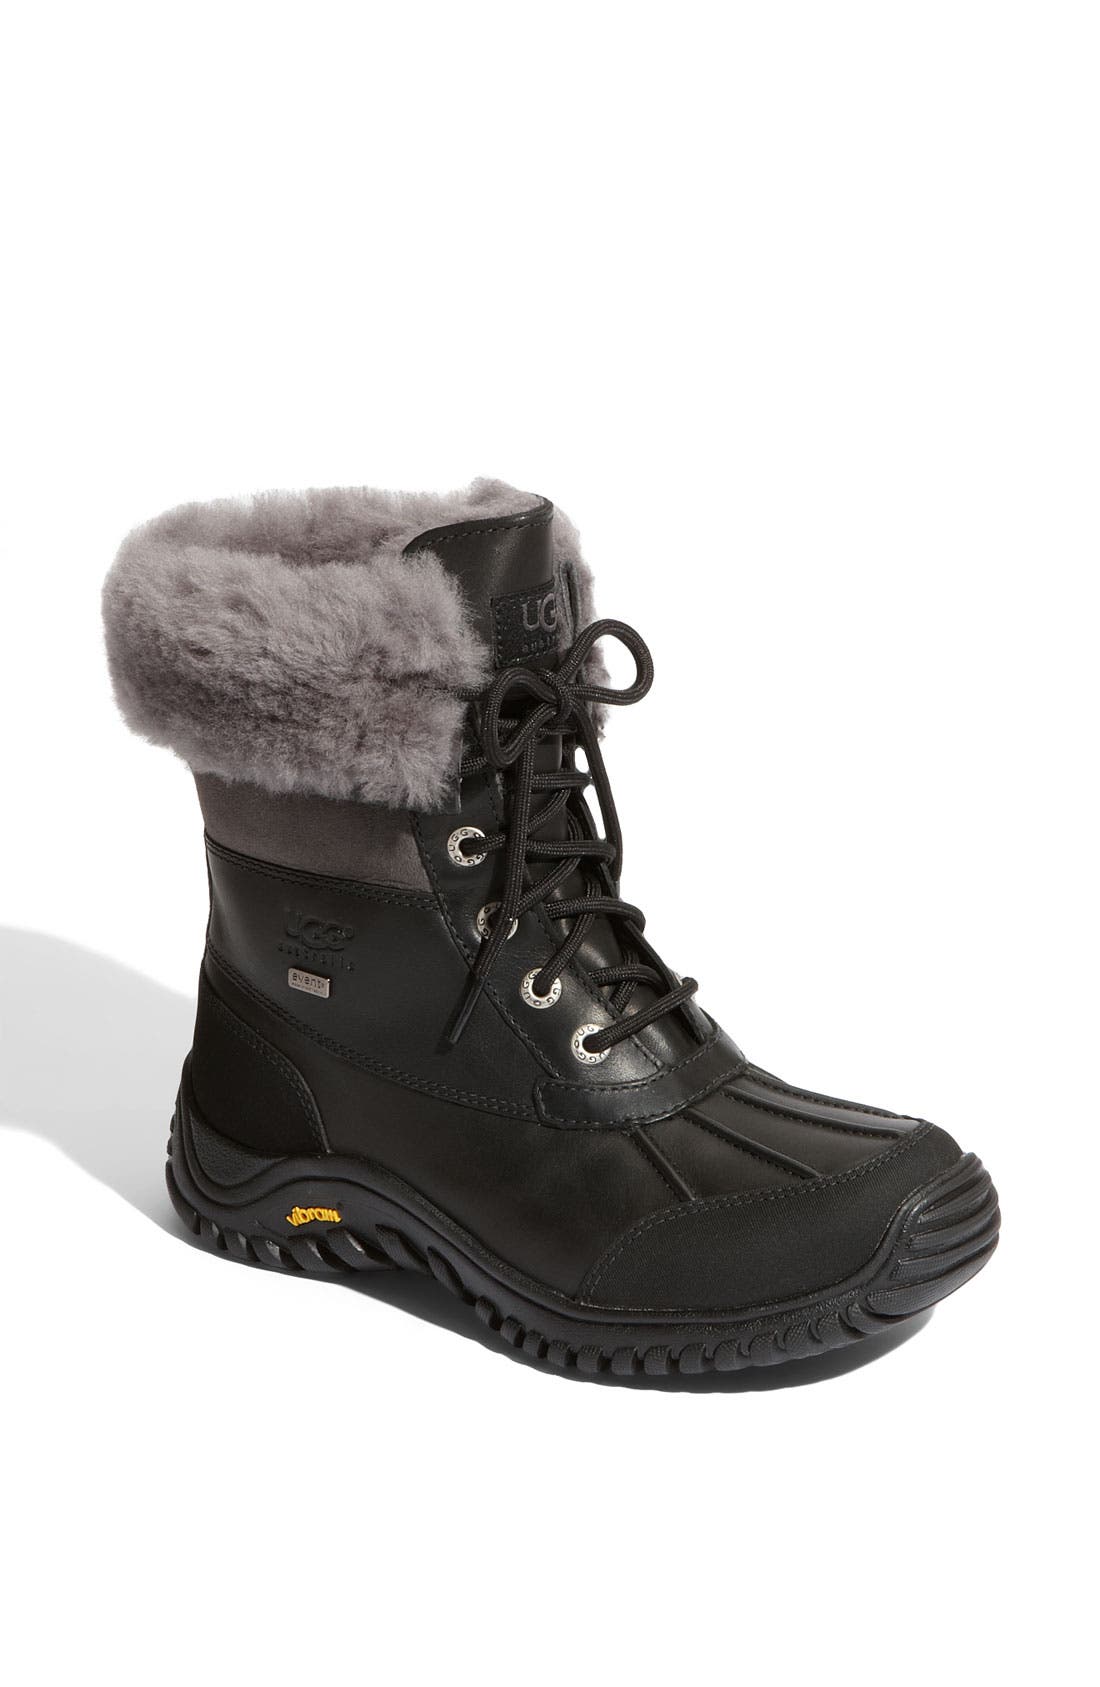 nordstrom hiking boots women's